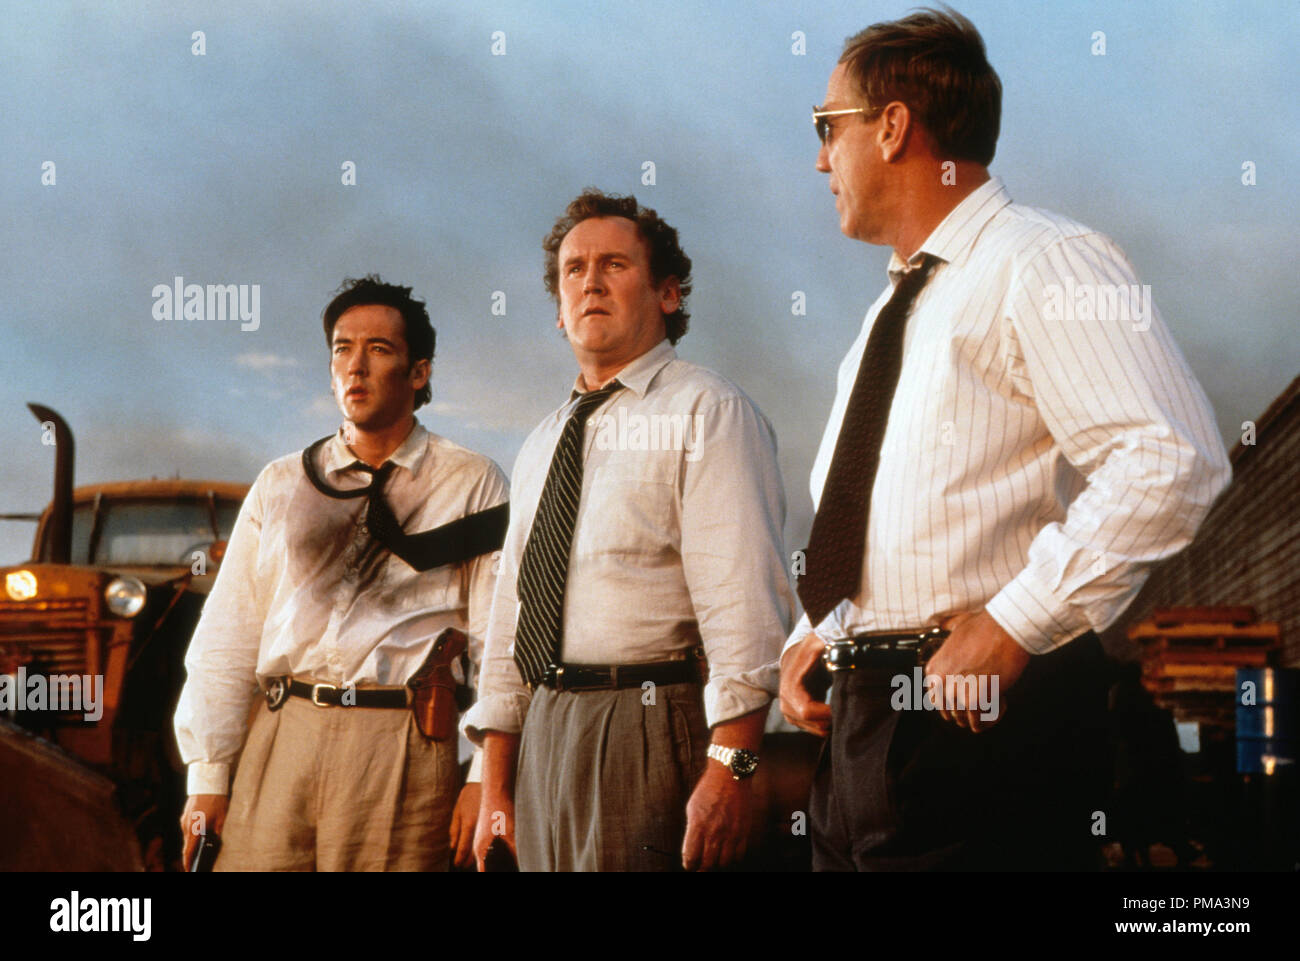 https://c8.alamy.com/comp/PMA3N9/con-air-john-cusack-colm-meaney-1997-touchstone-pictures-photo-credit-frank-masi-PMA3N9.jpg